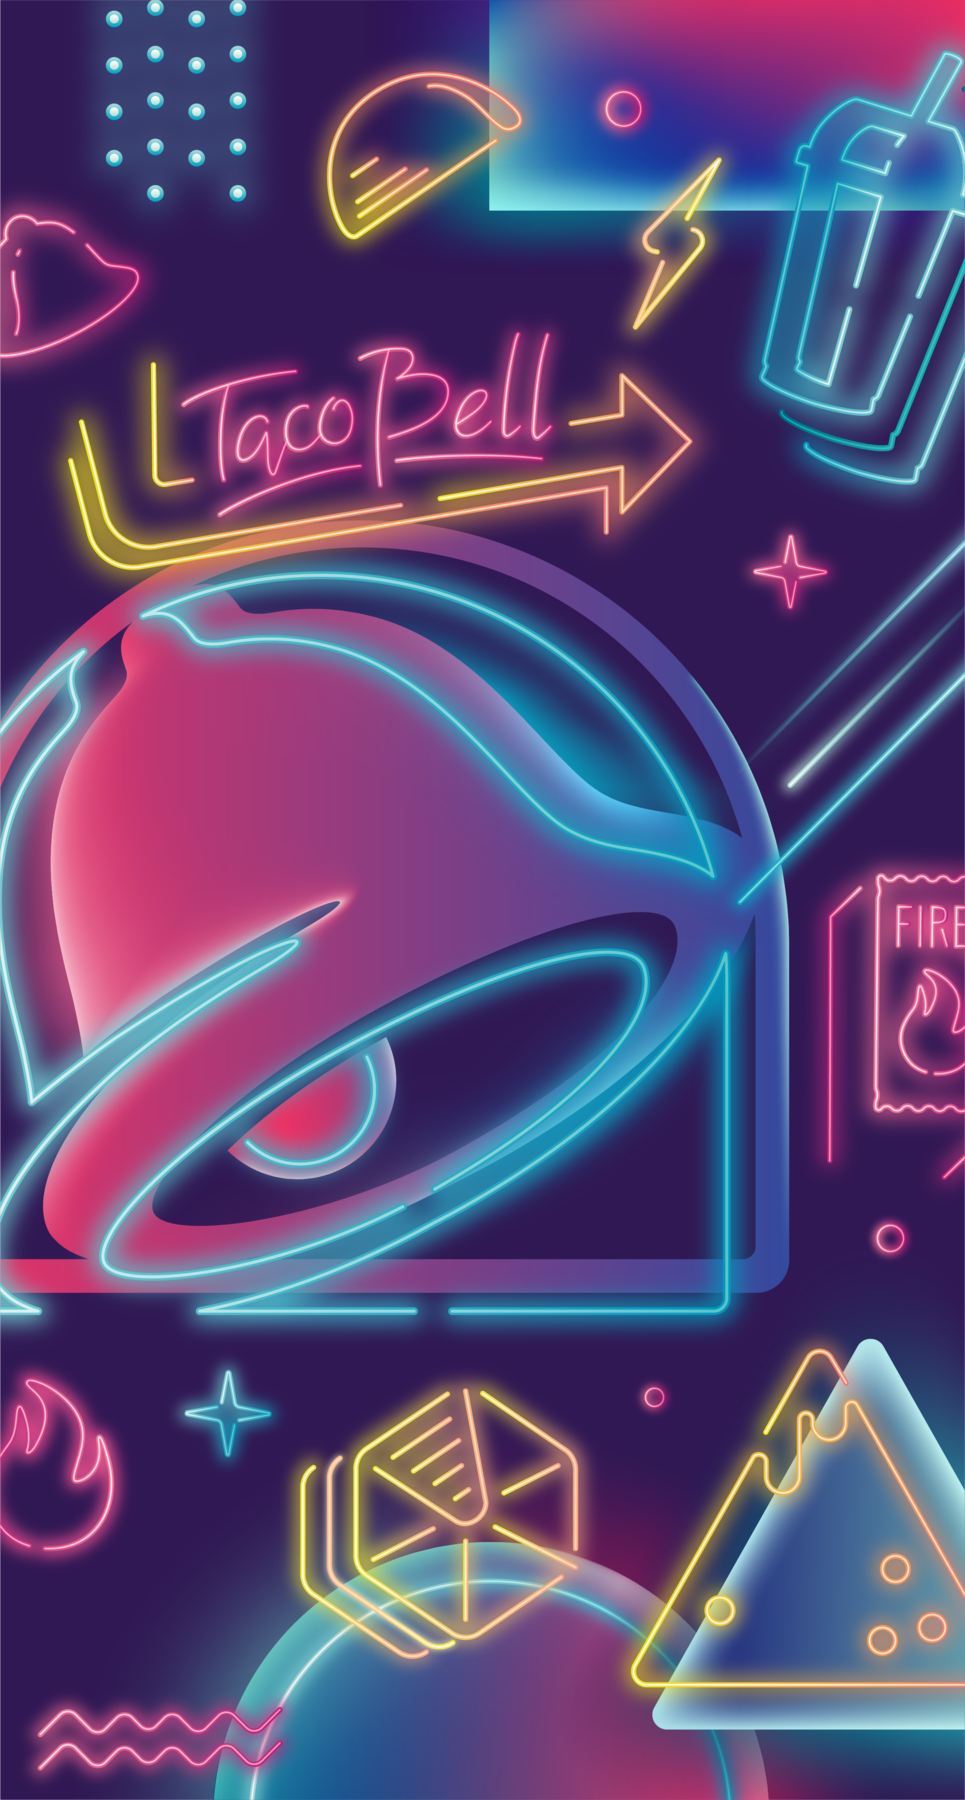 Taco Bell Wallpaper. iPhone wallpaper vintage, Photo wall collage, Phone wallpaper image